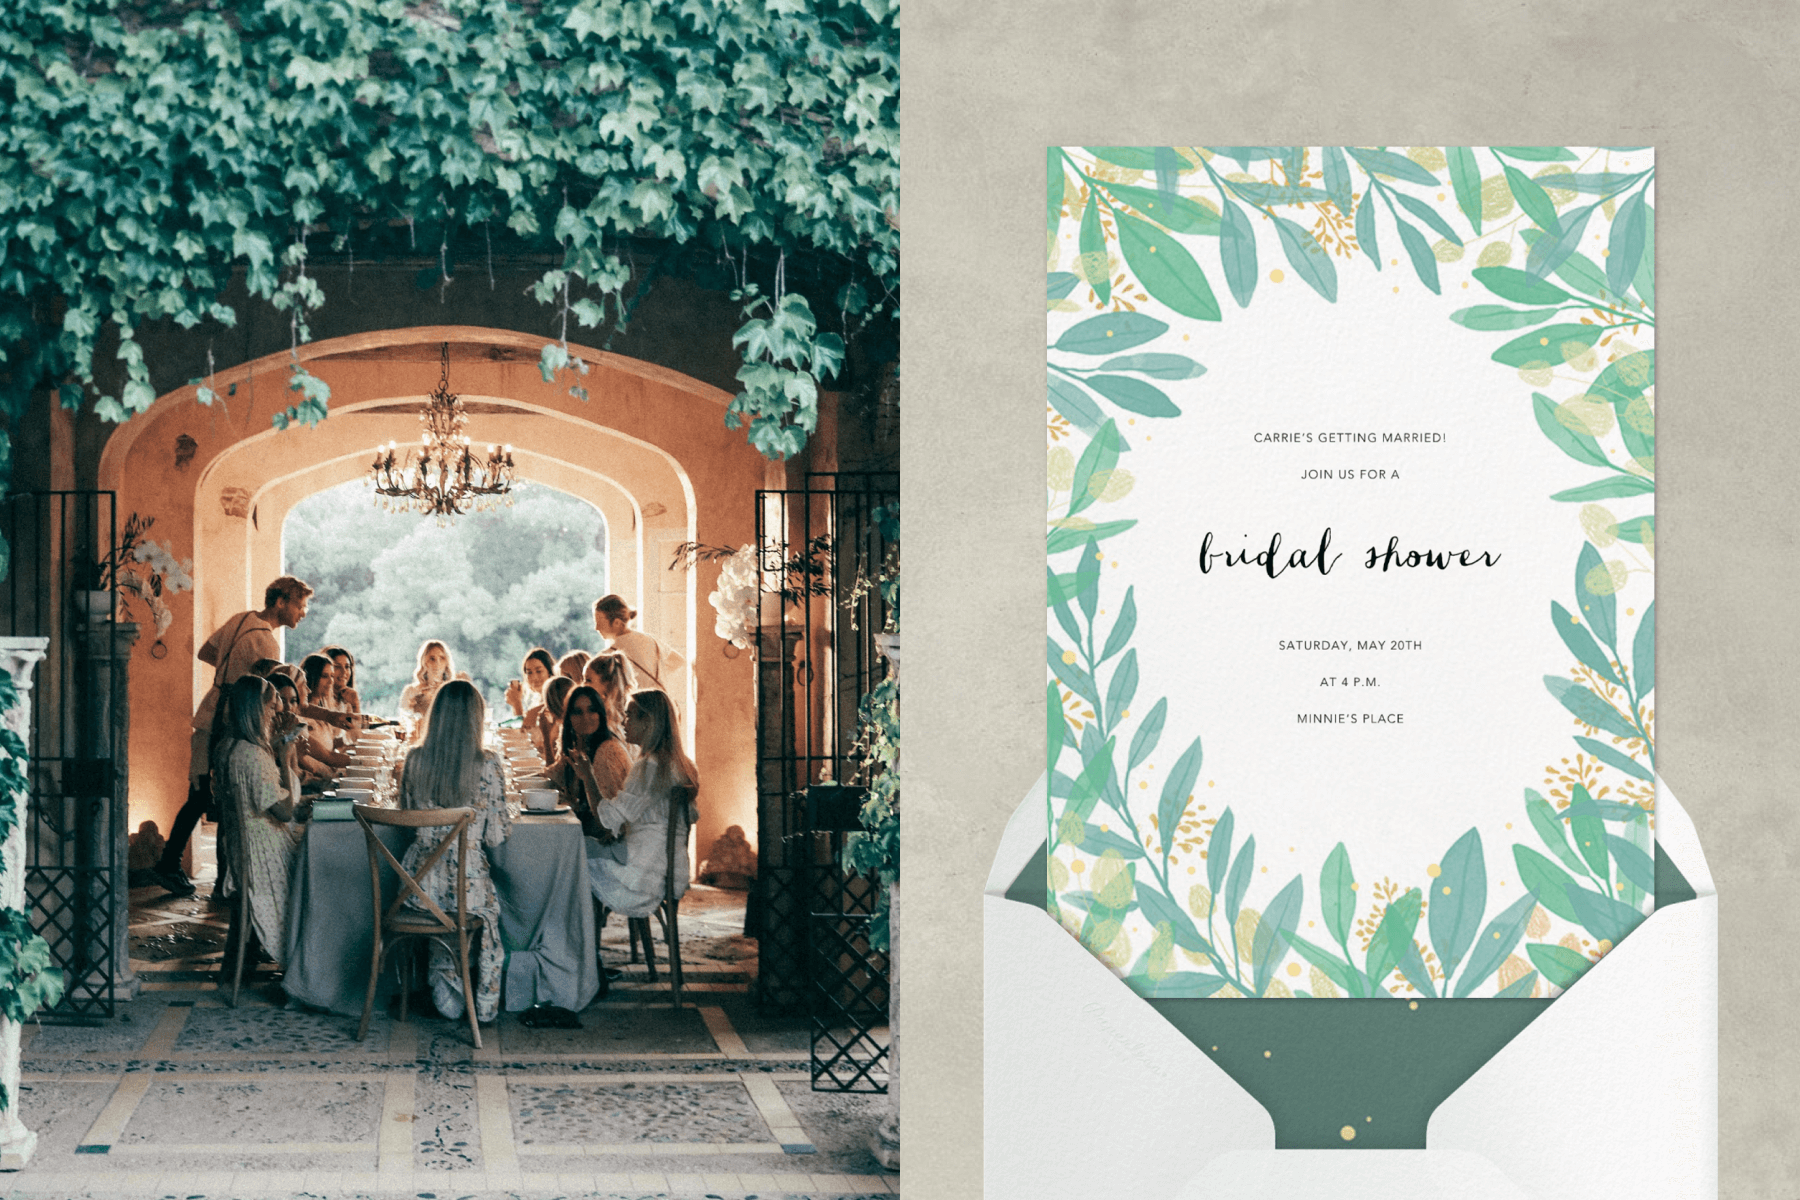 left: Women seated at a long table under a leafy archway are served by two waiters. Right: A bridal shower invitation with a border of painterly green leaves and orange flower buds.